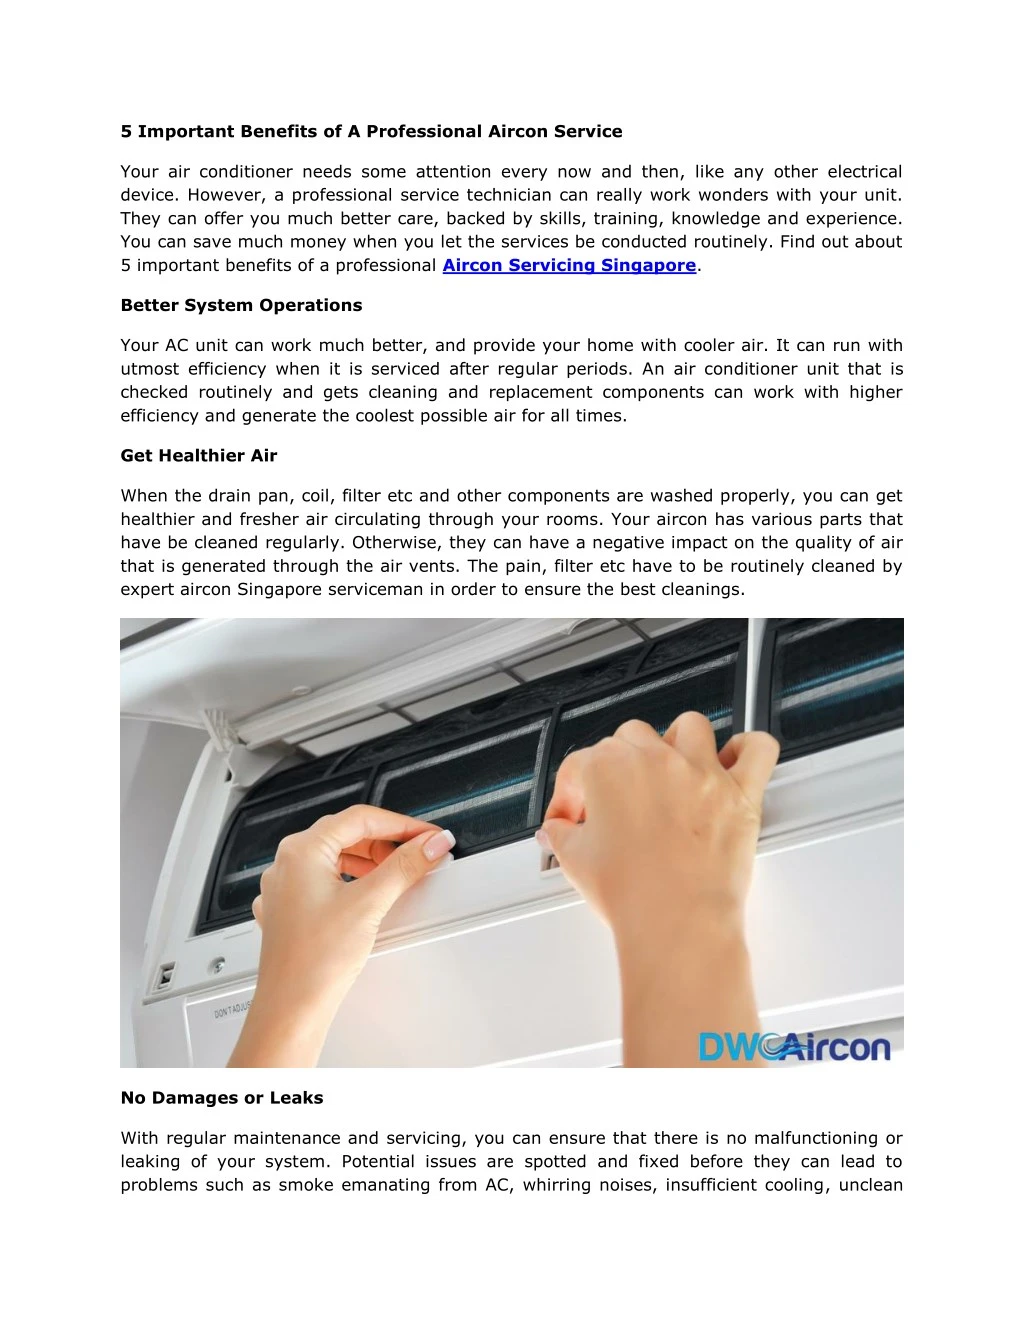 5 important benefits of a professional aircon